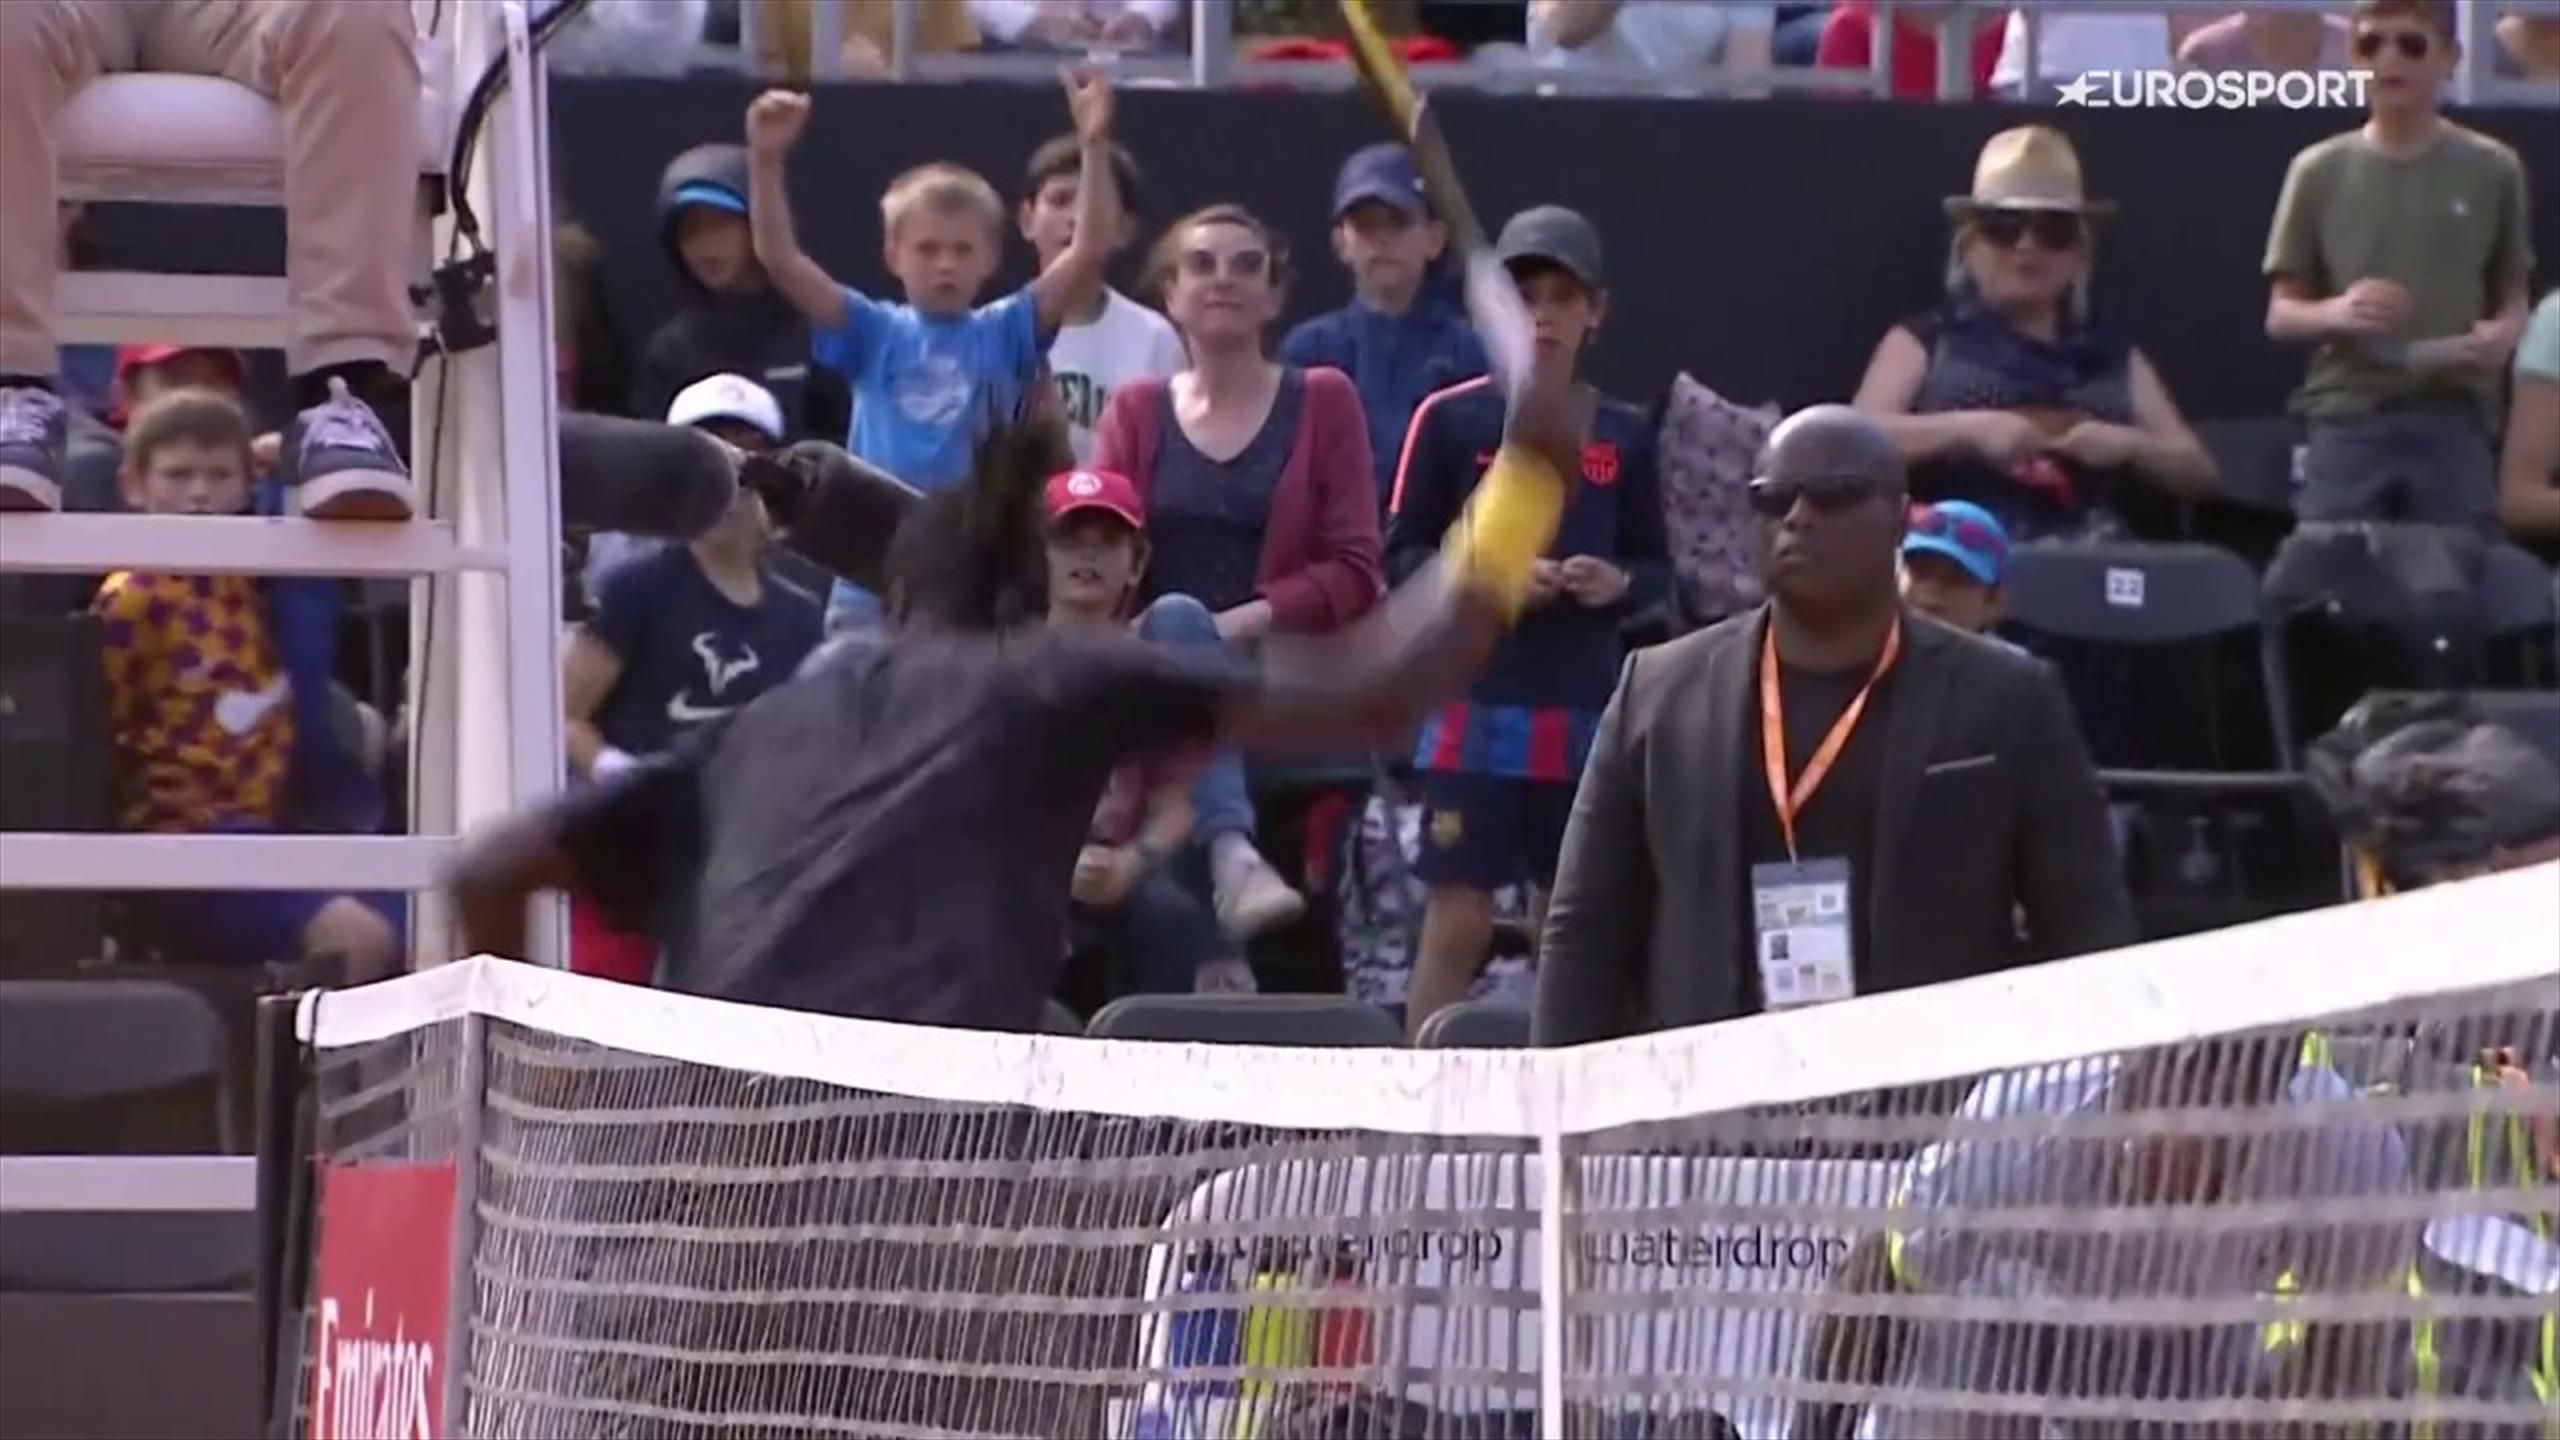 Hes going to be gone here! - Mikael Ymer disqualified in Lyon after smashing racket against umpire chair - Tennis video